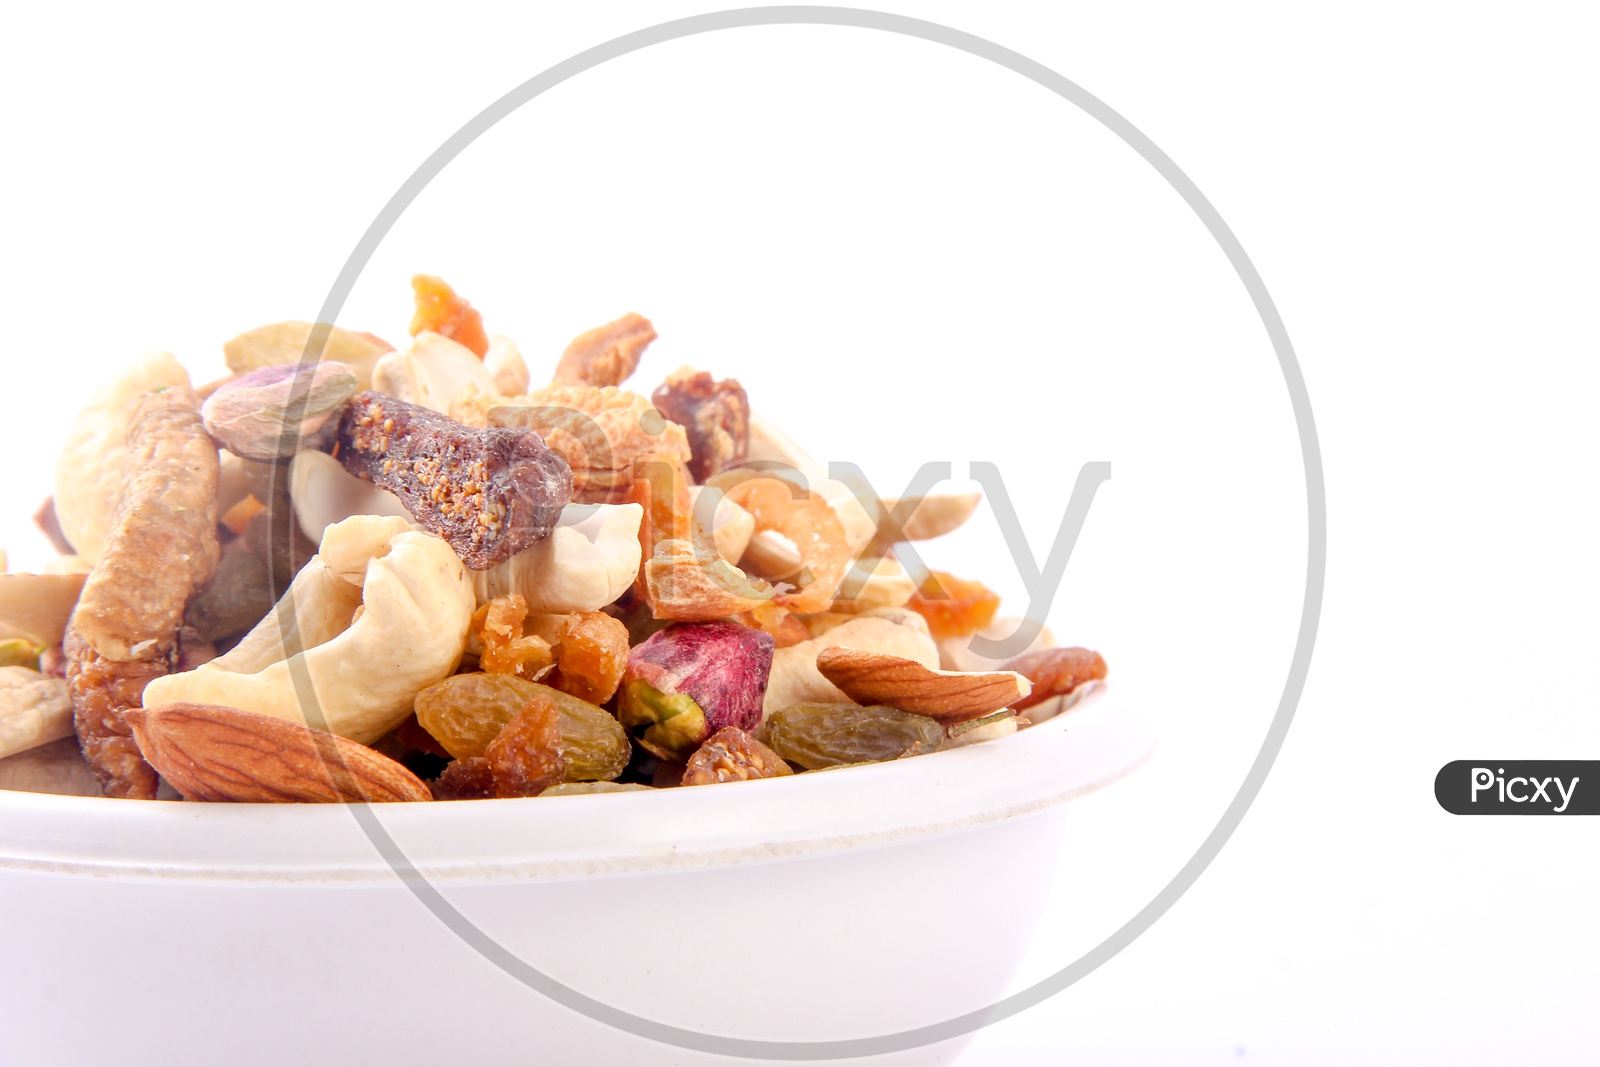 Mixed Dry Fruits in a Bowl